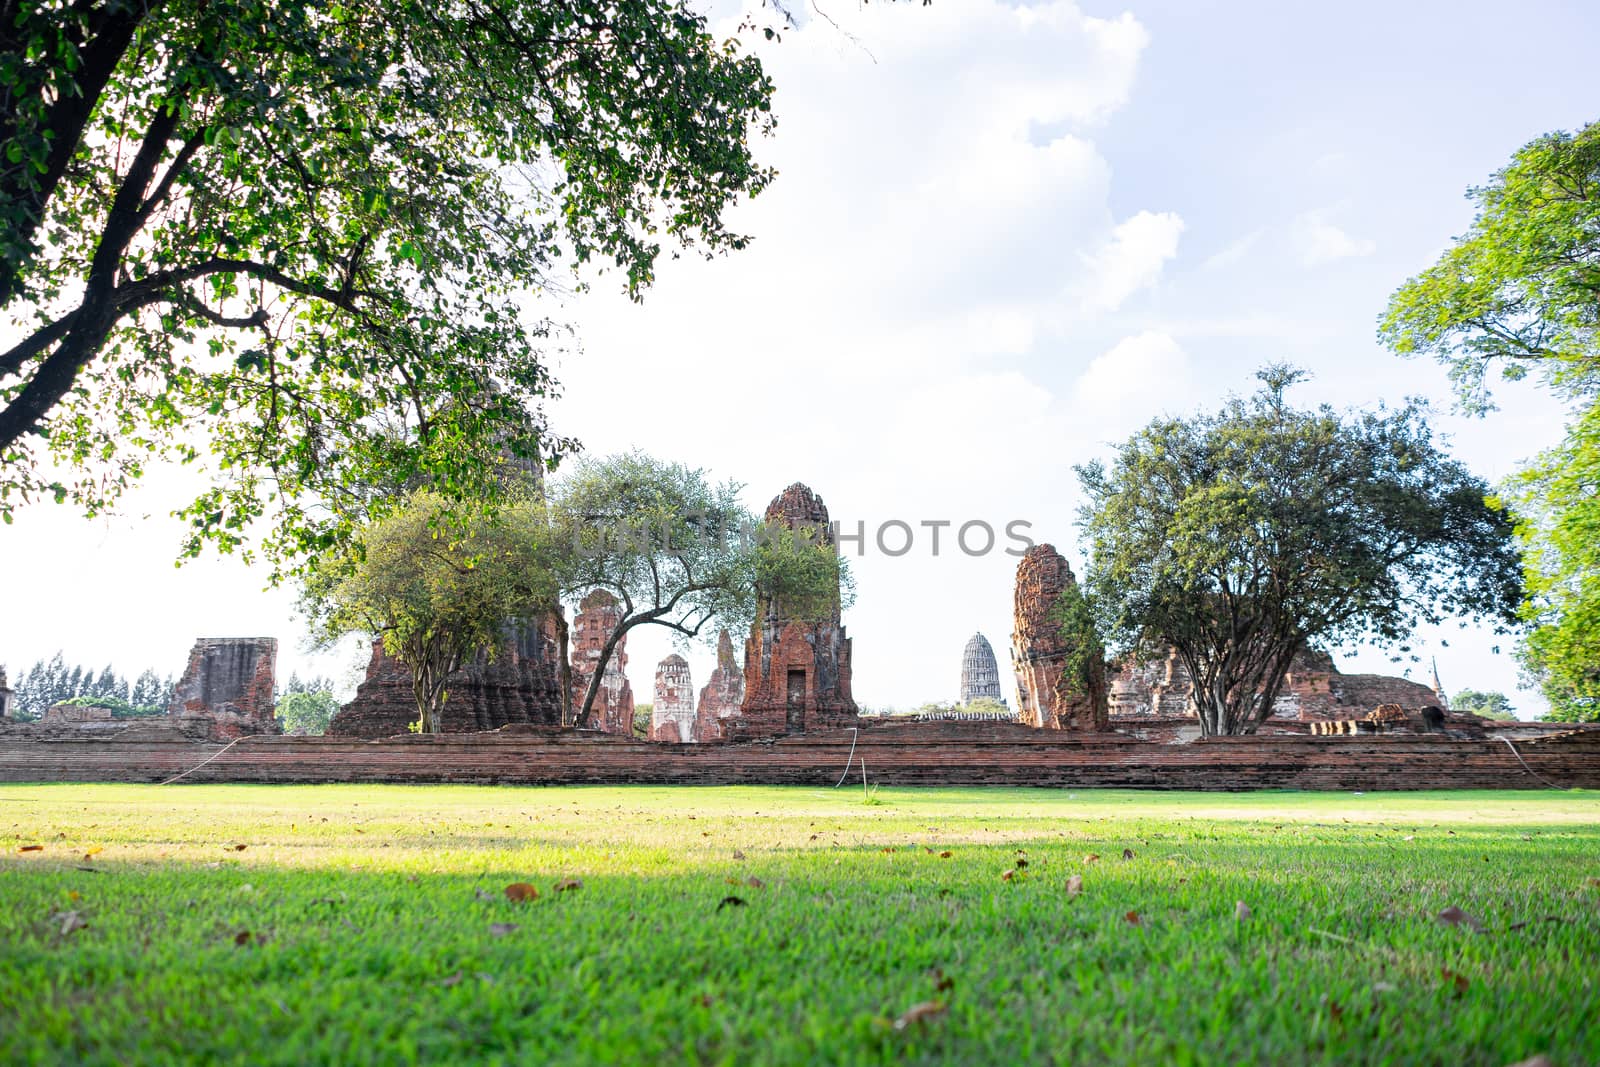 Architecture of the Famous Old Temple in Ayutthaya, Temple in Phra Nakhon Si Ayutthaya Historical Park, Ayutthaya Province, Thailand